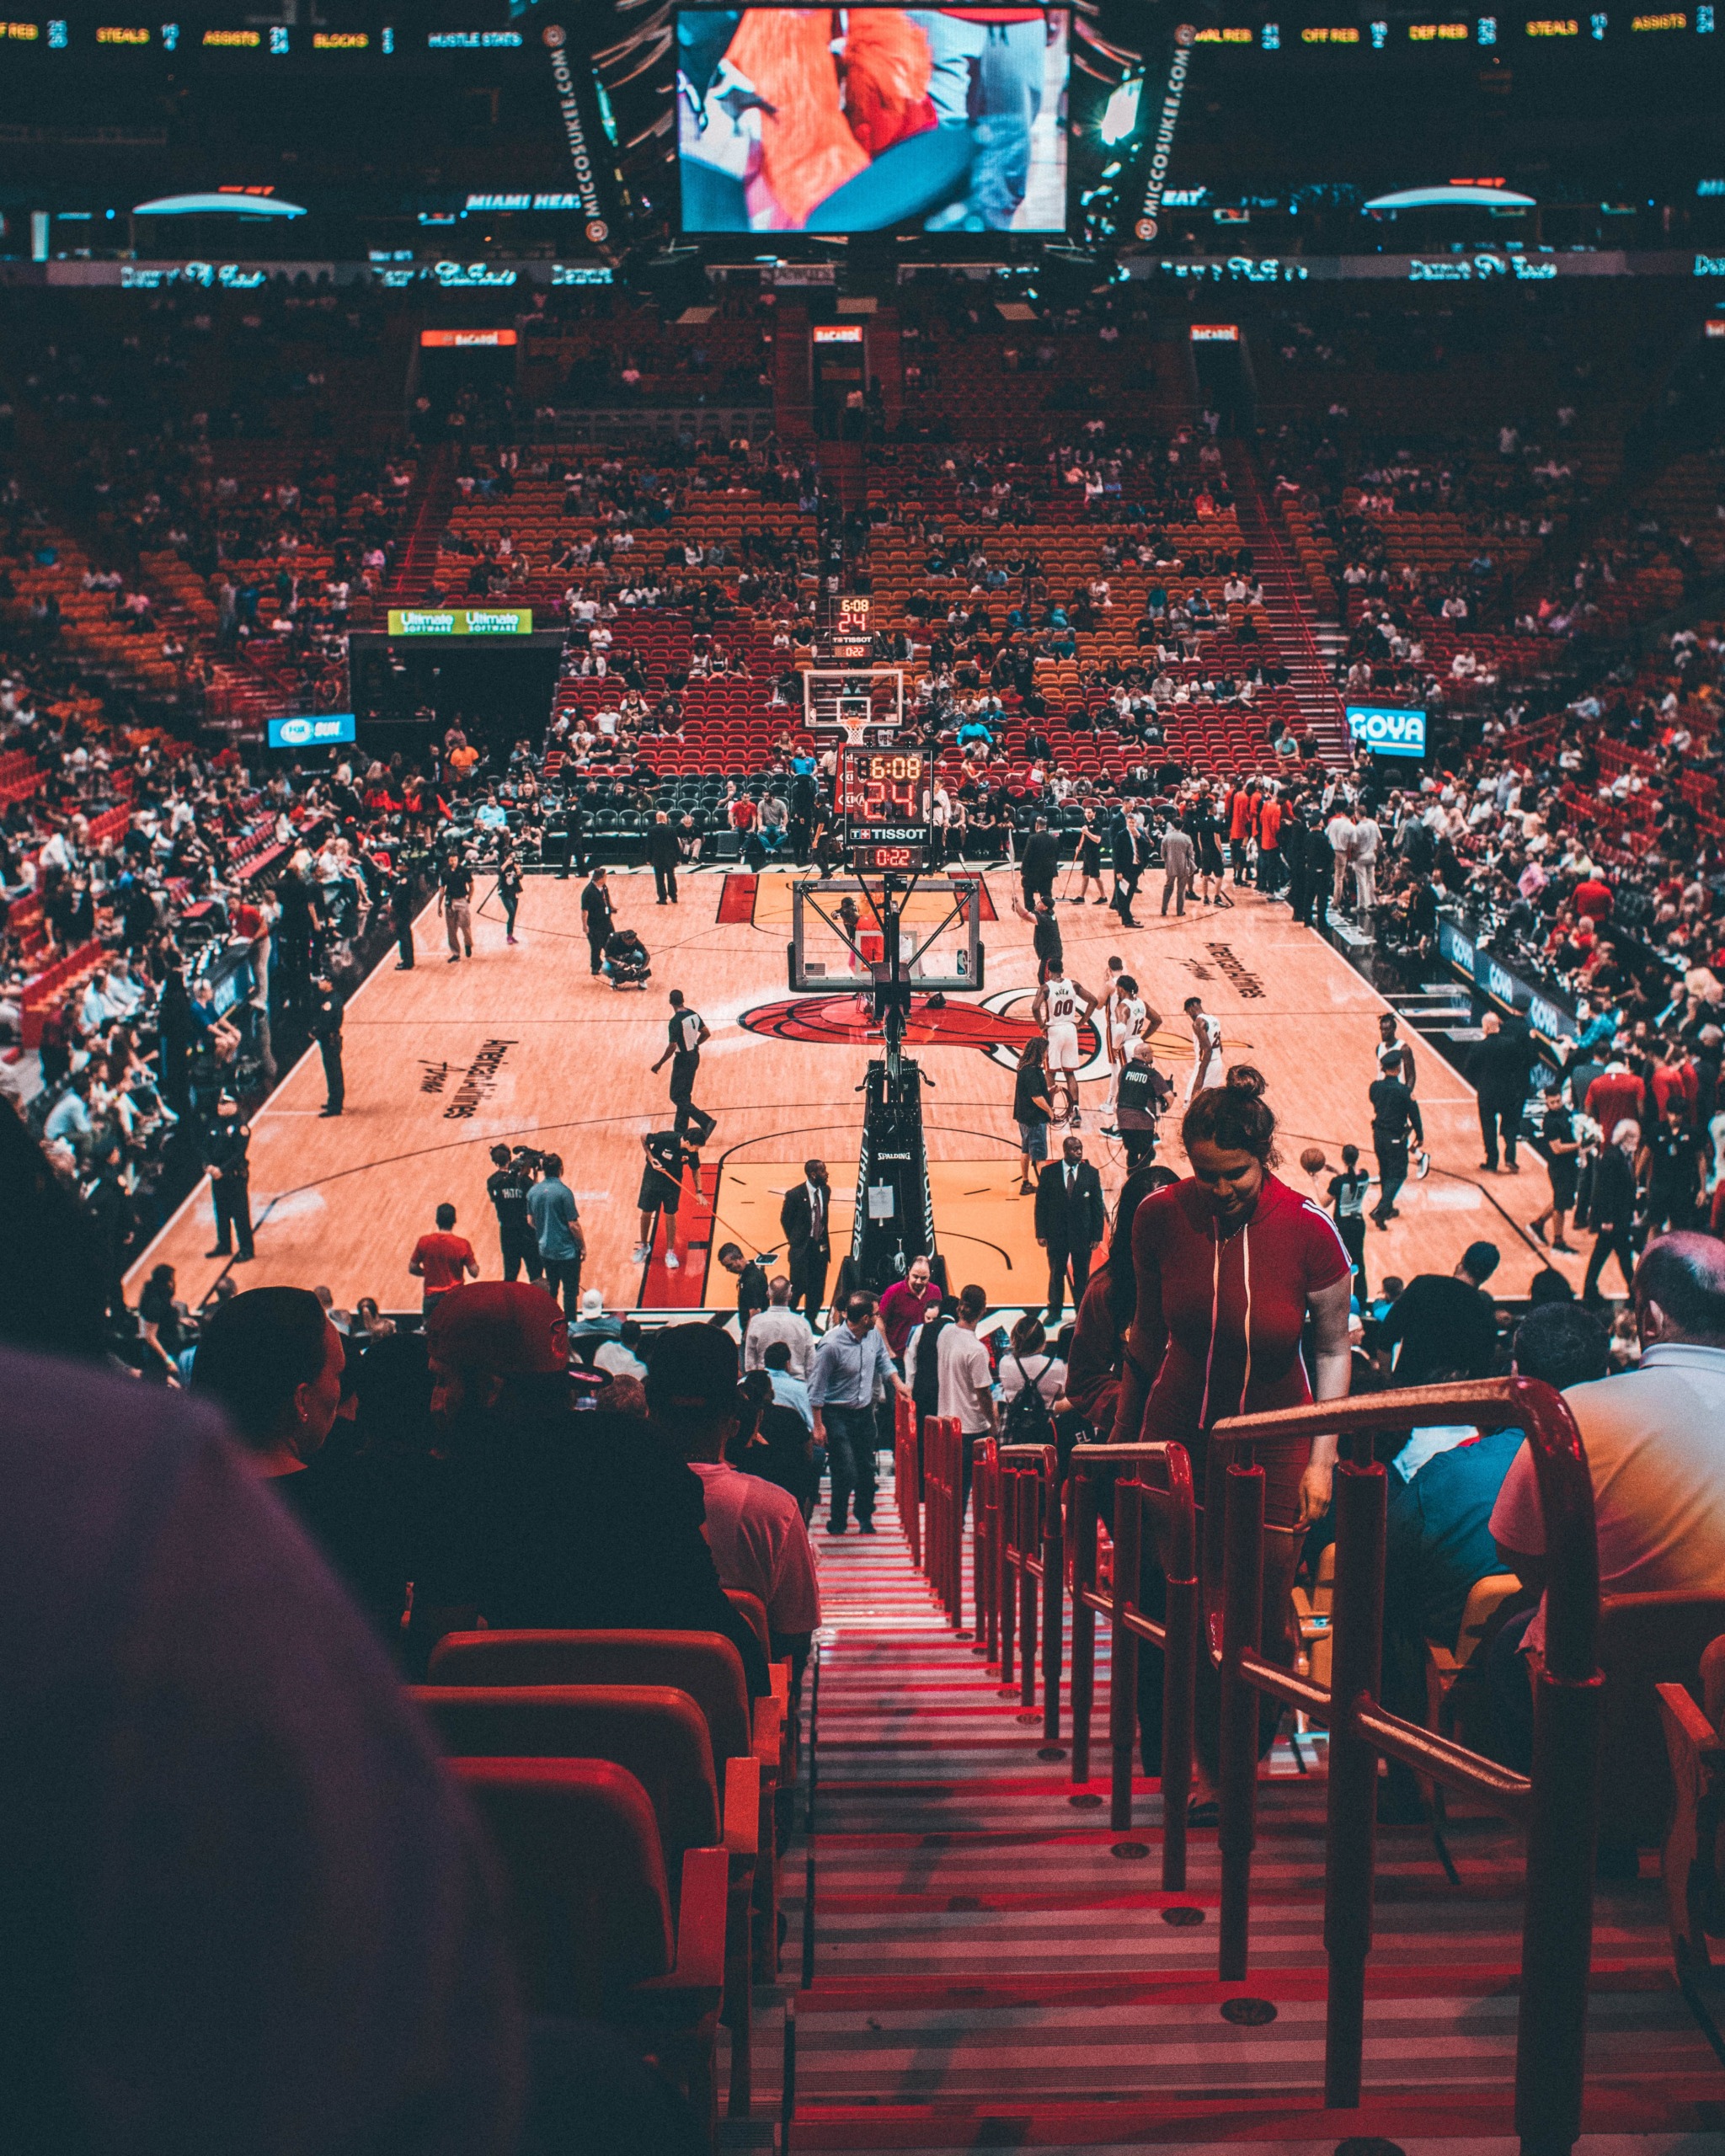 Miami Team Able to Bring Basketball Fans Back to Arena With the